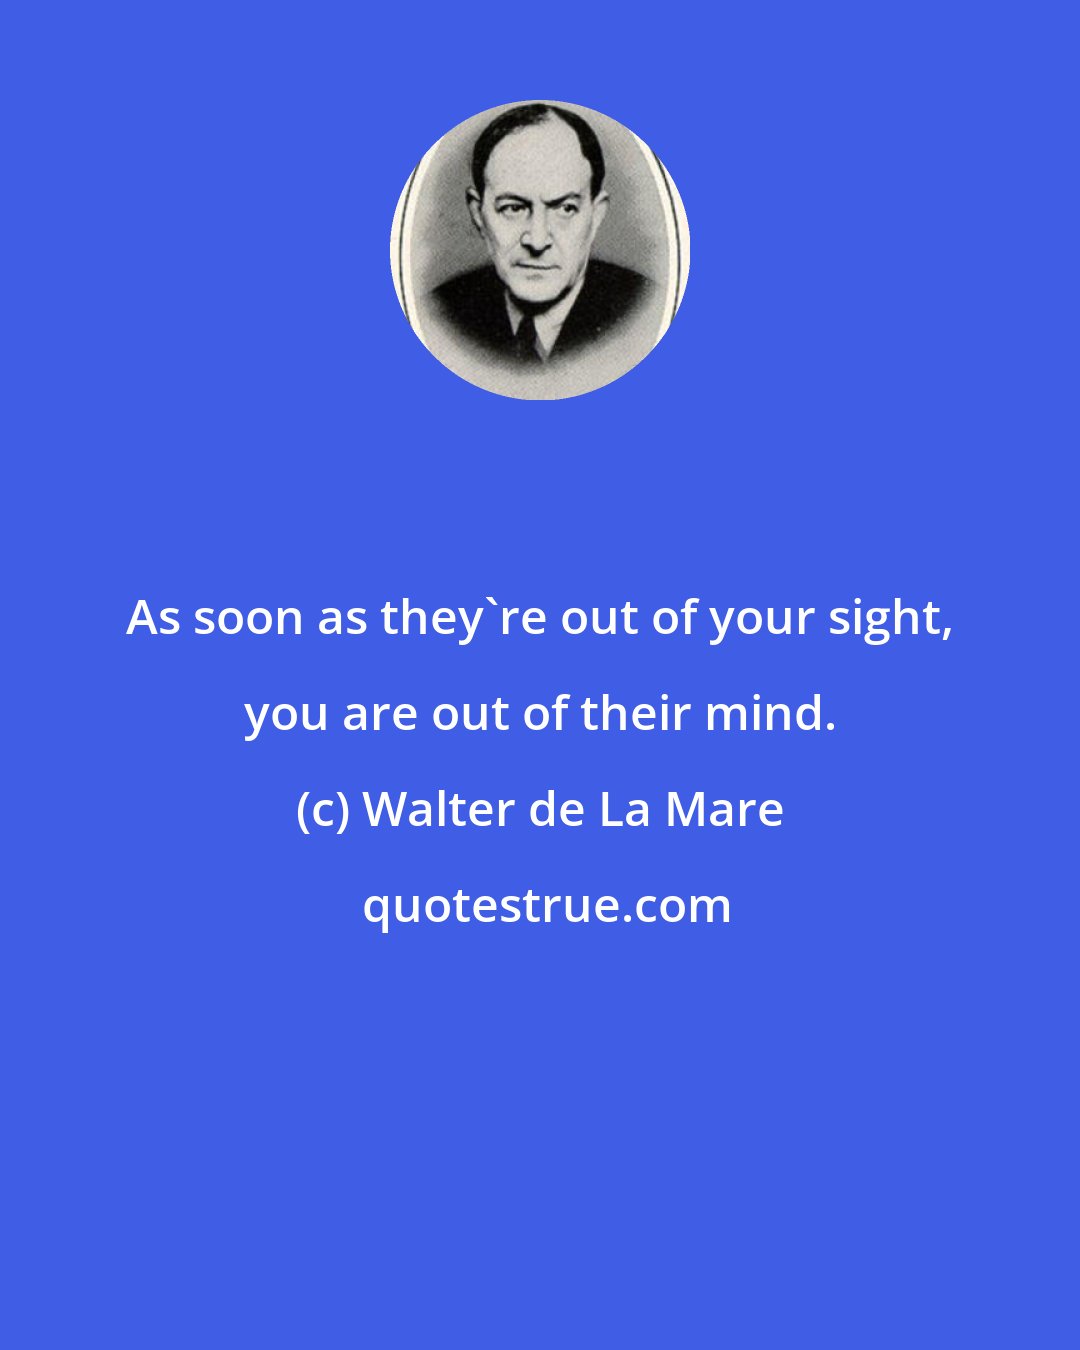 Walter de La Mare: As soon as they're out of your sight, you are out of their mind.